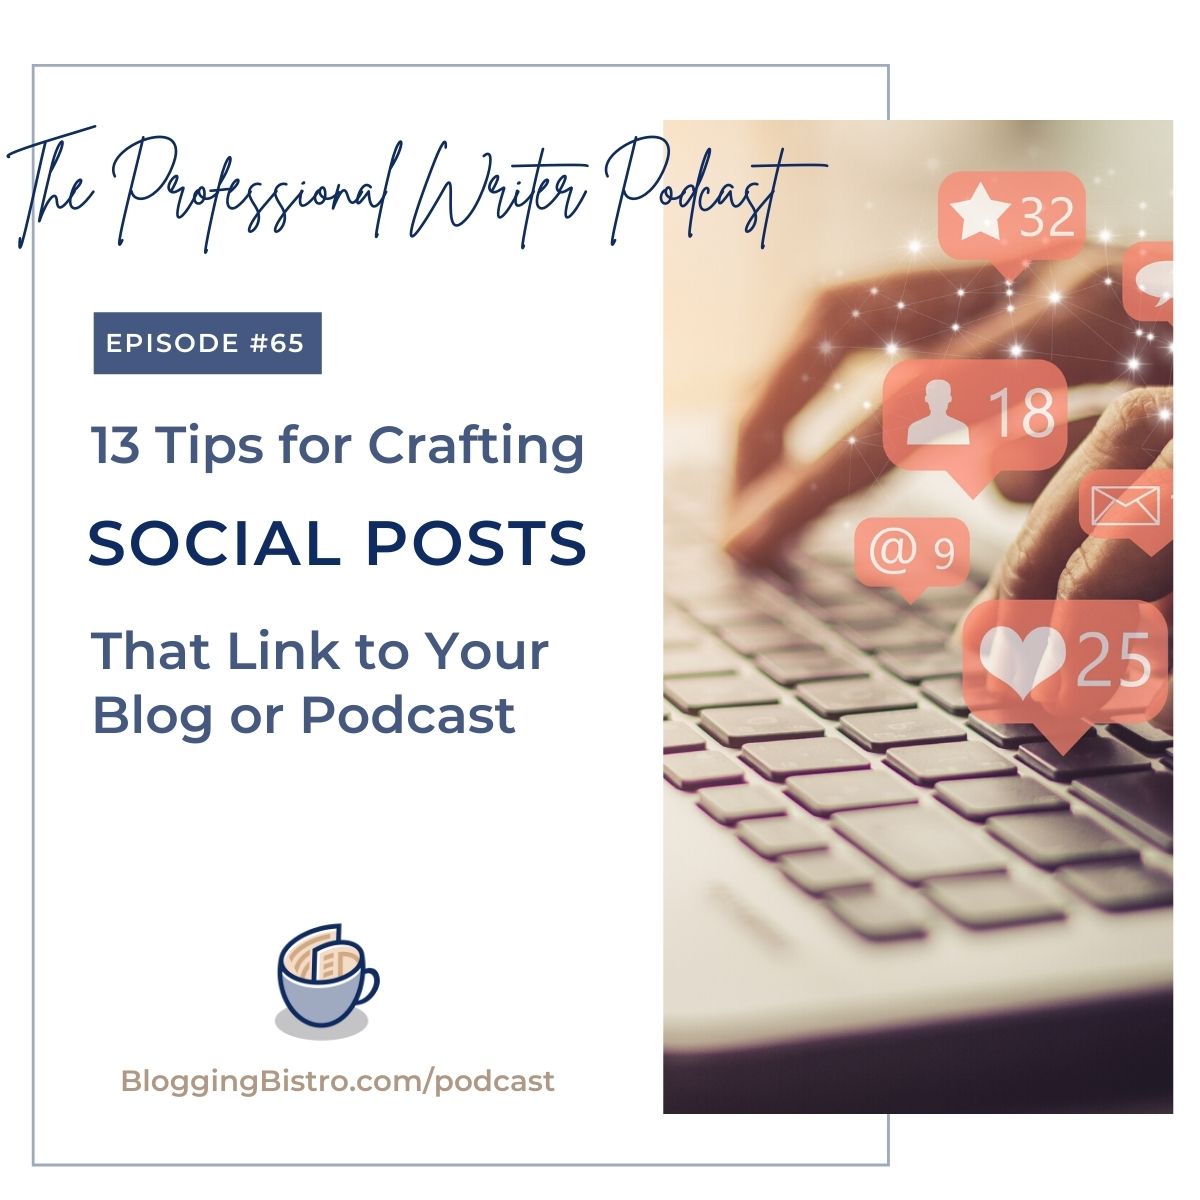 13 Tips for Crafting Stellar Social Posts That Link to Your Blog or Podcast